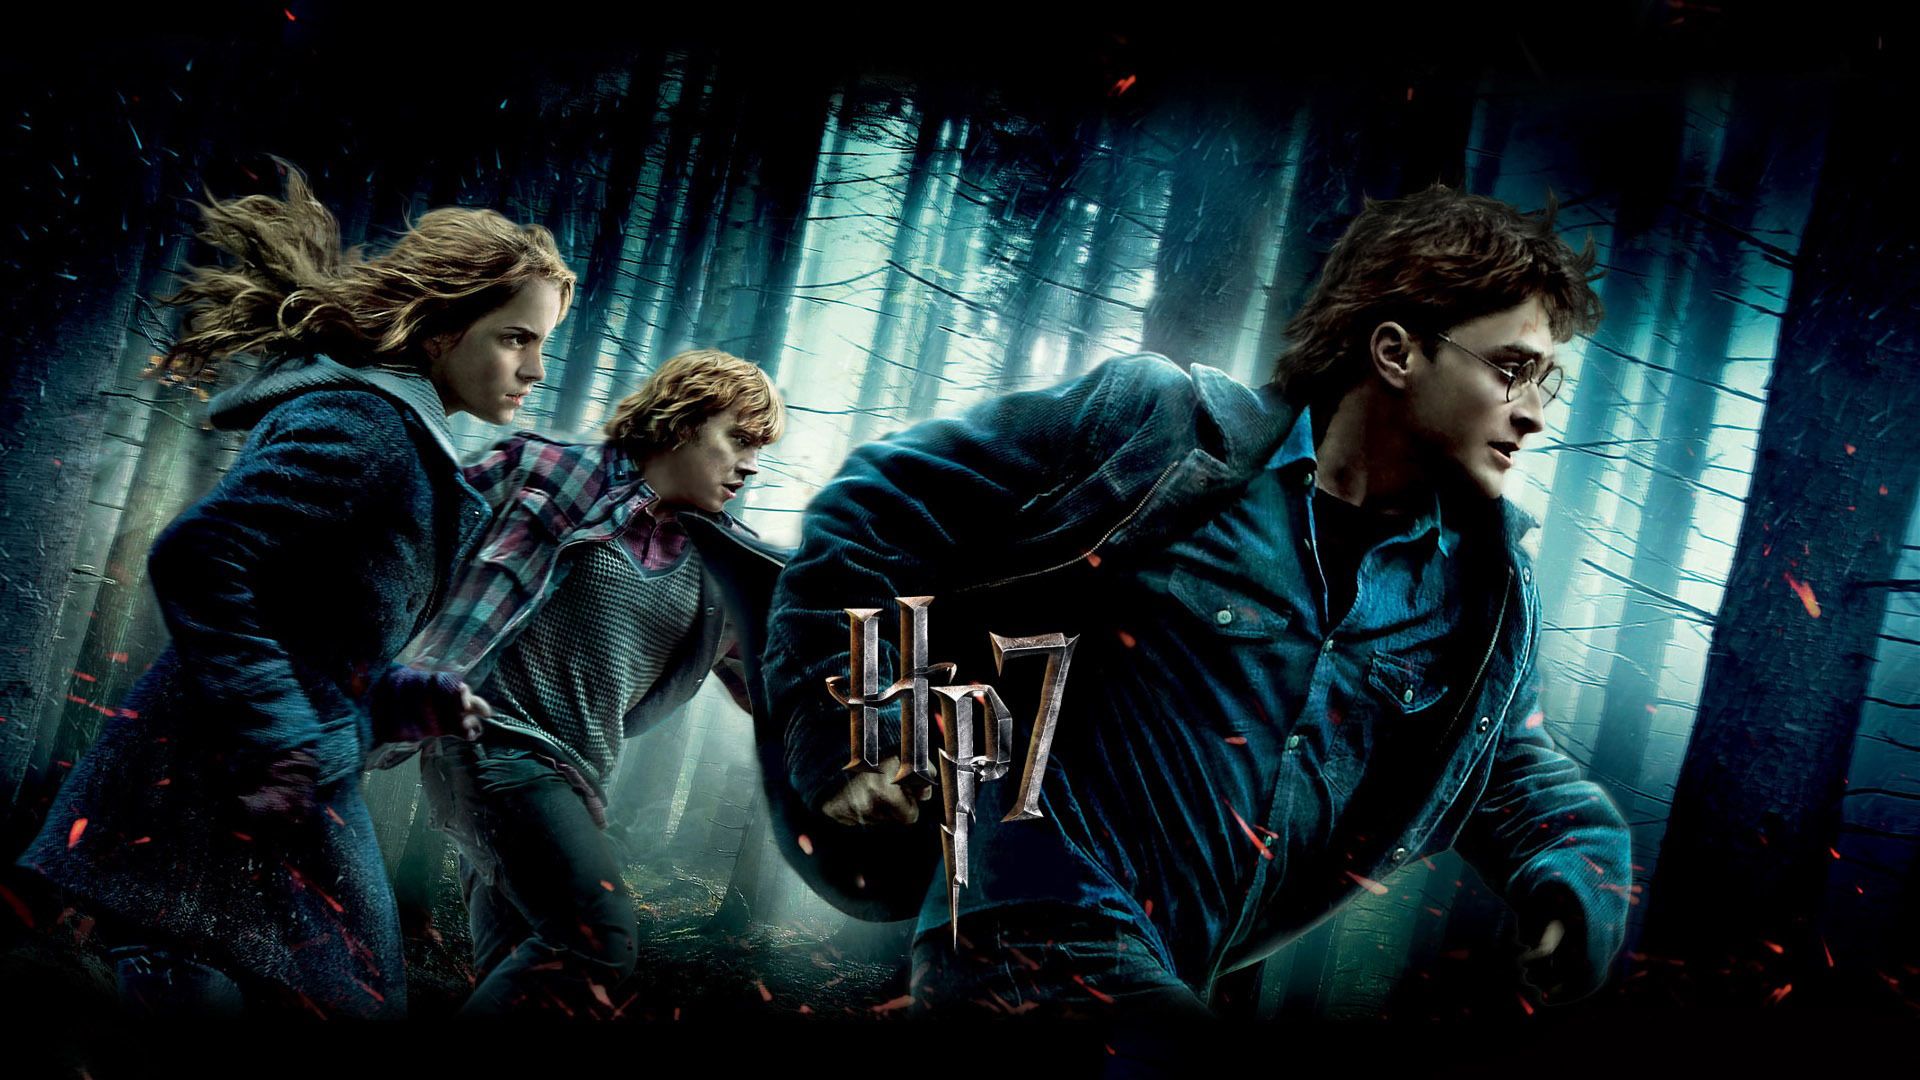 100% Quality HD Creative Harry Potter And The Deathly Hallows Picture